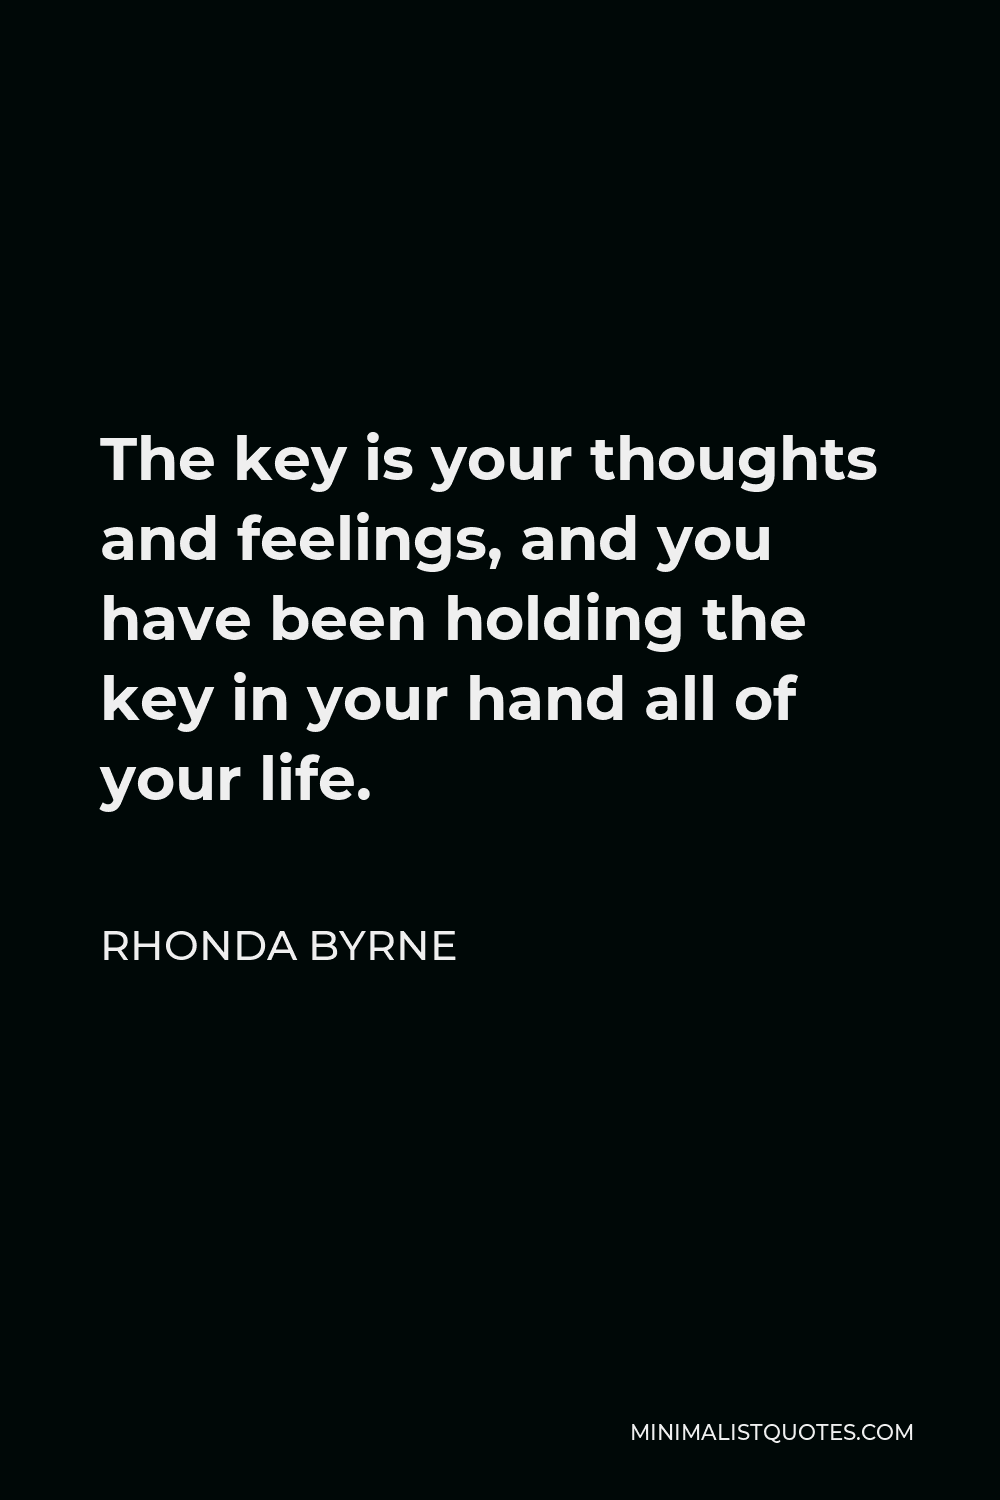 Rhonda Byrne Quote - The key is your thoughts and feelings, and you have been holding the key in your hand all of your life.